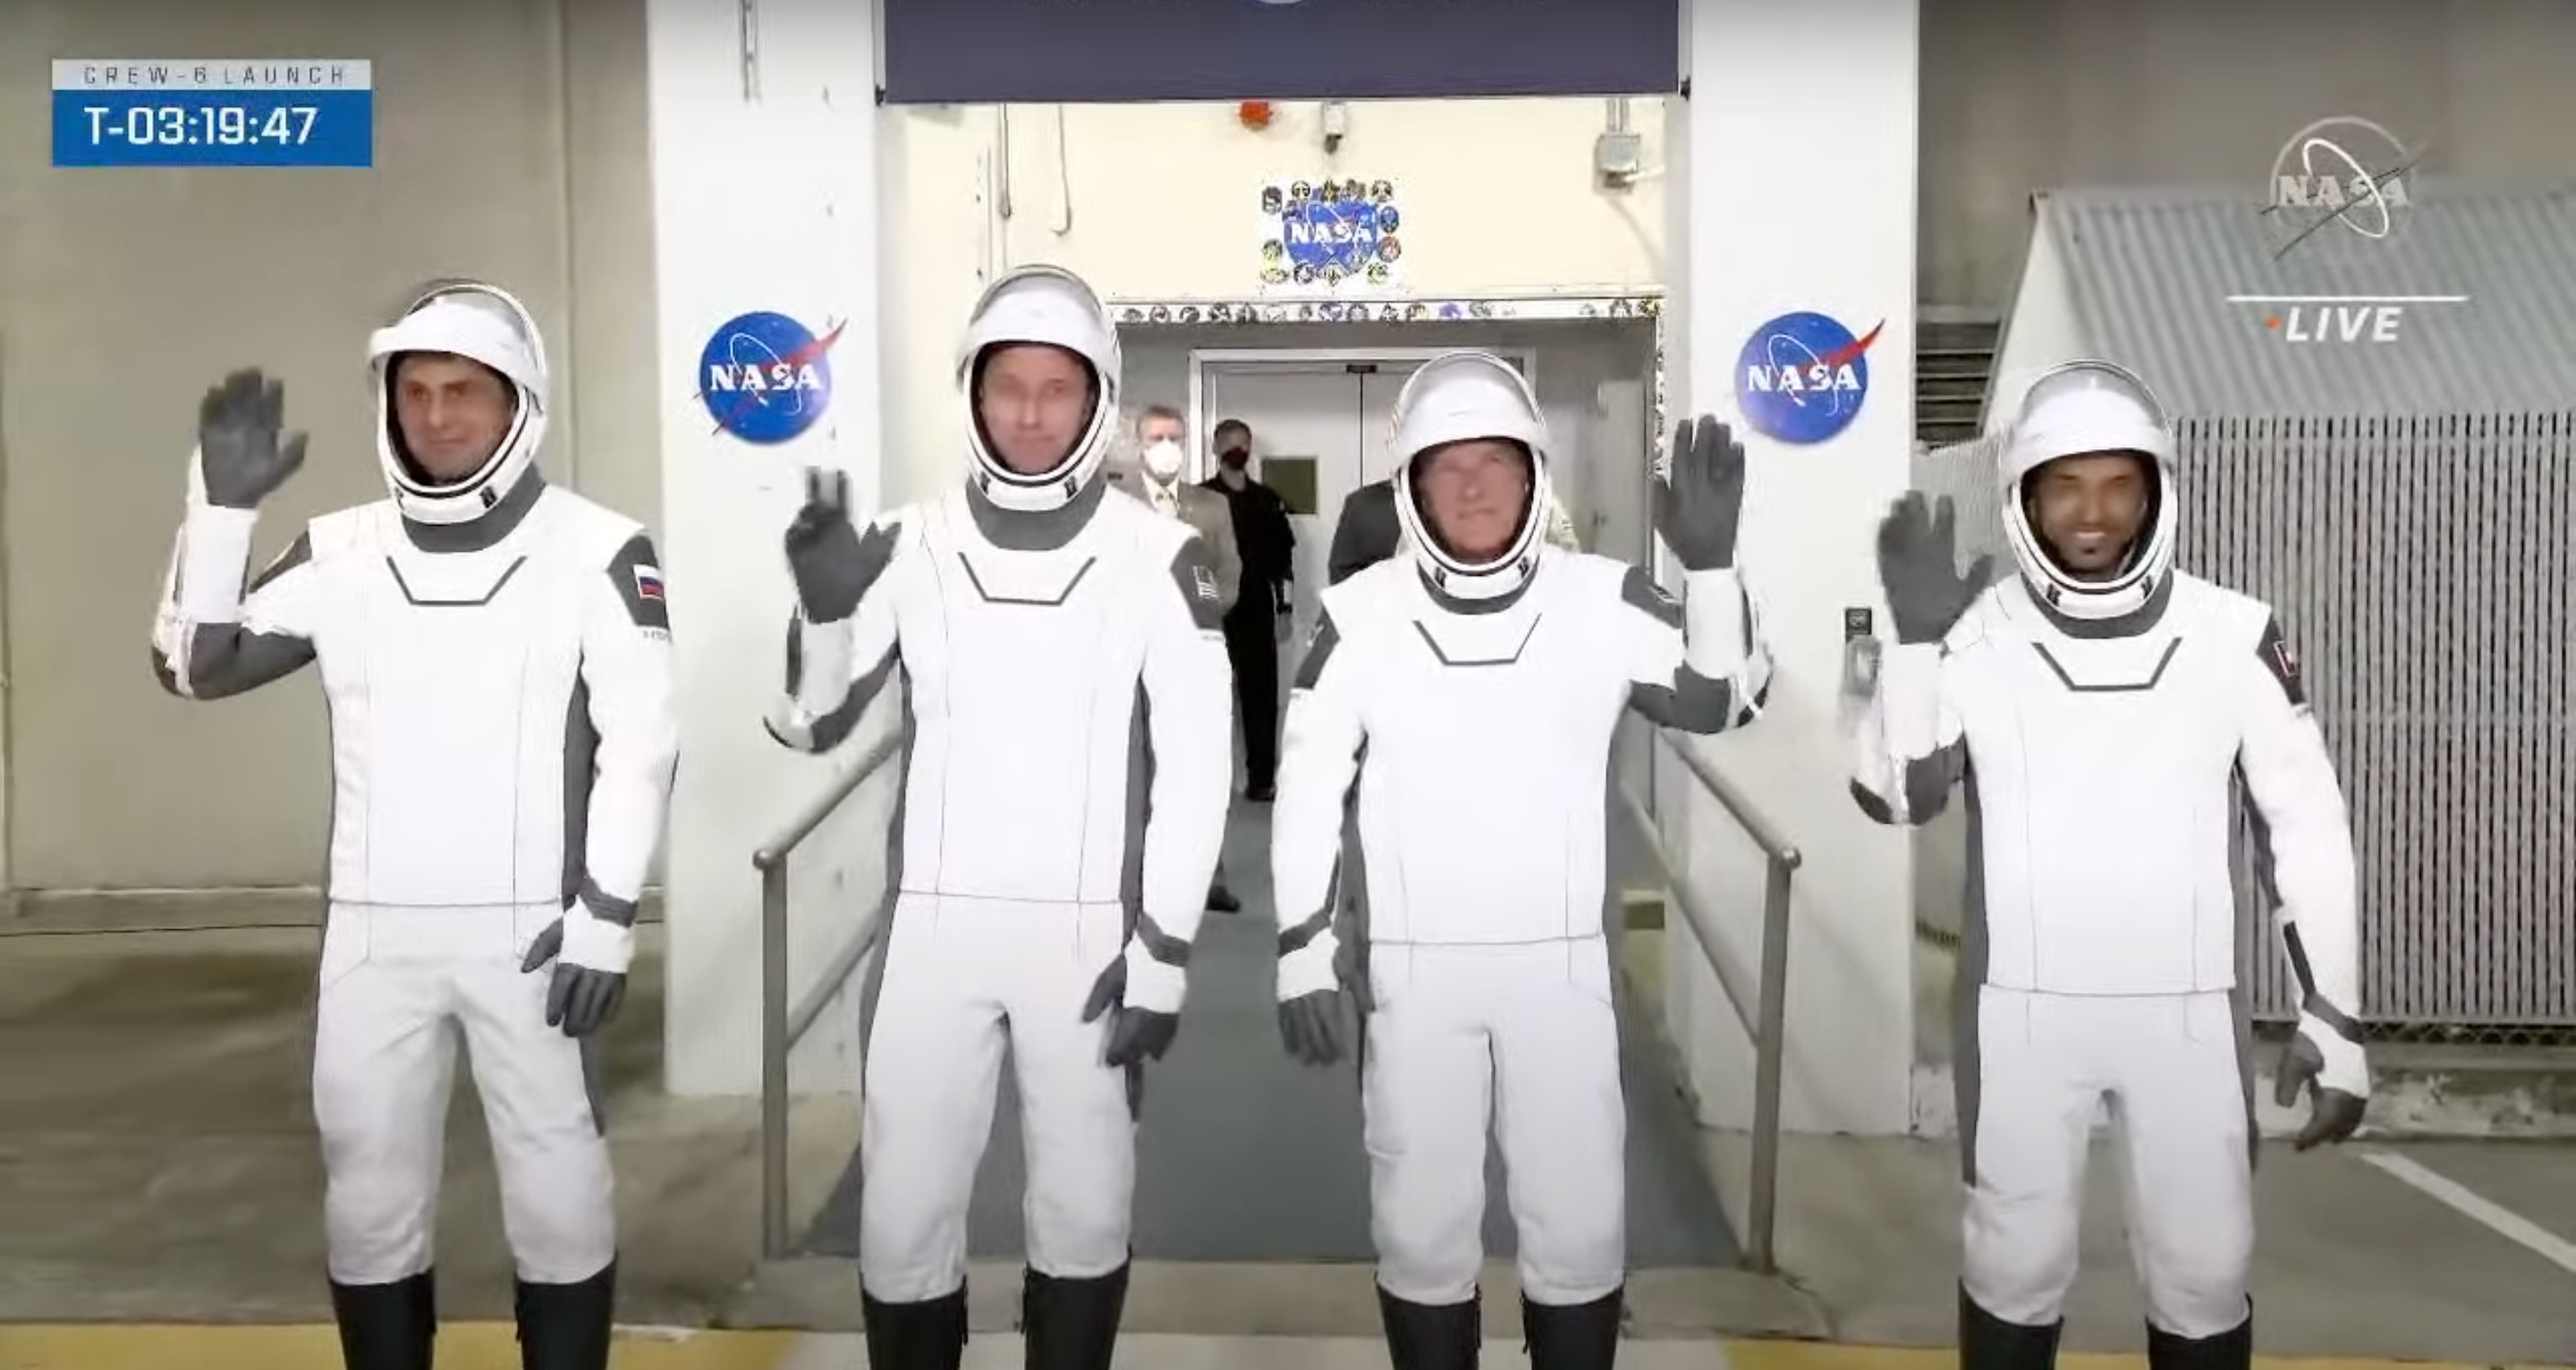 The Crew-6 astronauts walk out from their crew quarters at NASA's Kennedy Space Center on March 1, 2023 ahead of their planned launch early on the morning of March 2.